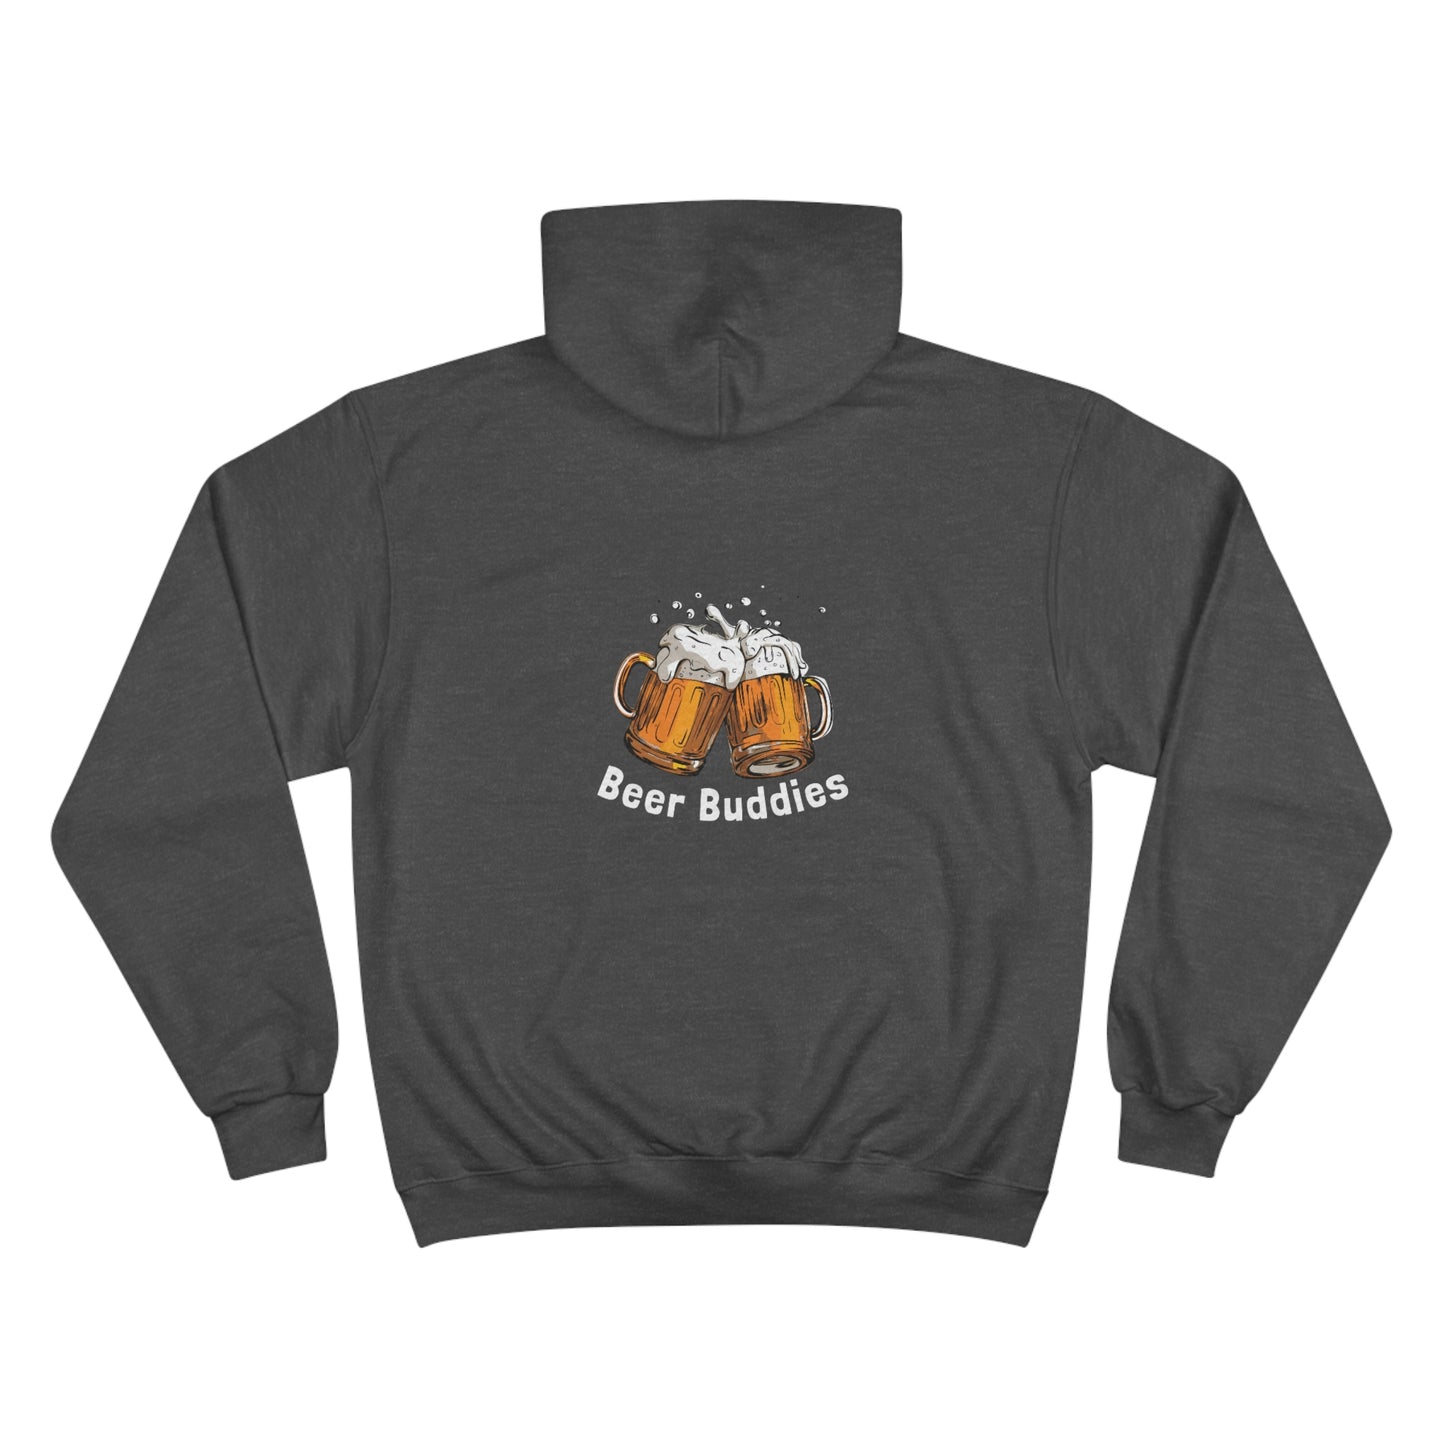 Hoodie Elevate Your Style with Konaloo's Pirate Champion Hoodie - Perfect for Beer Lovers and Everyday Wear!